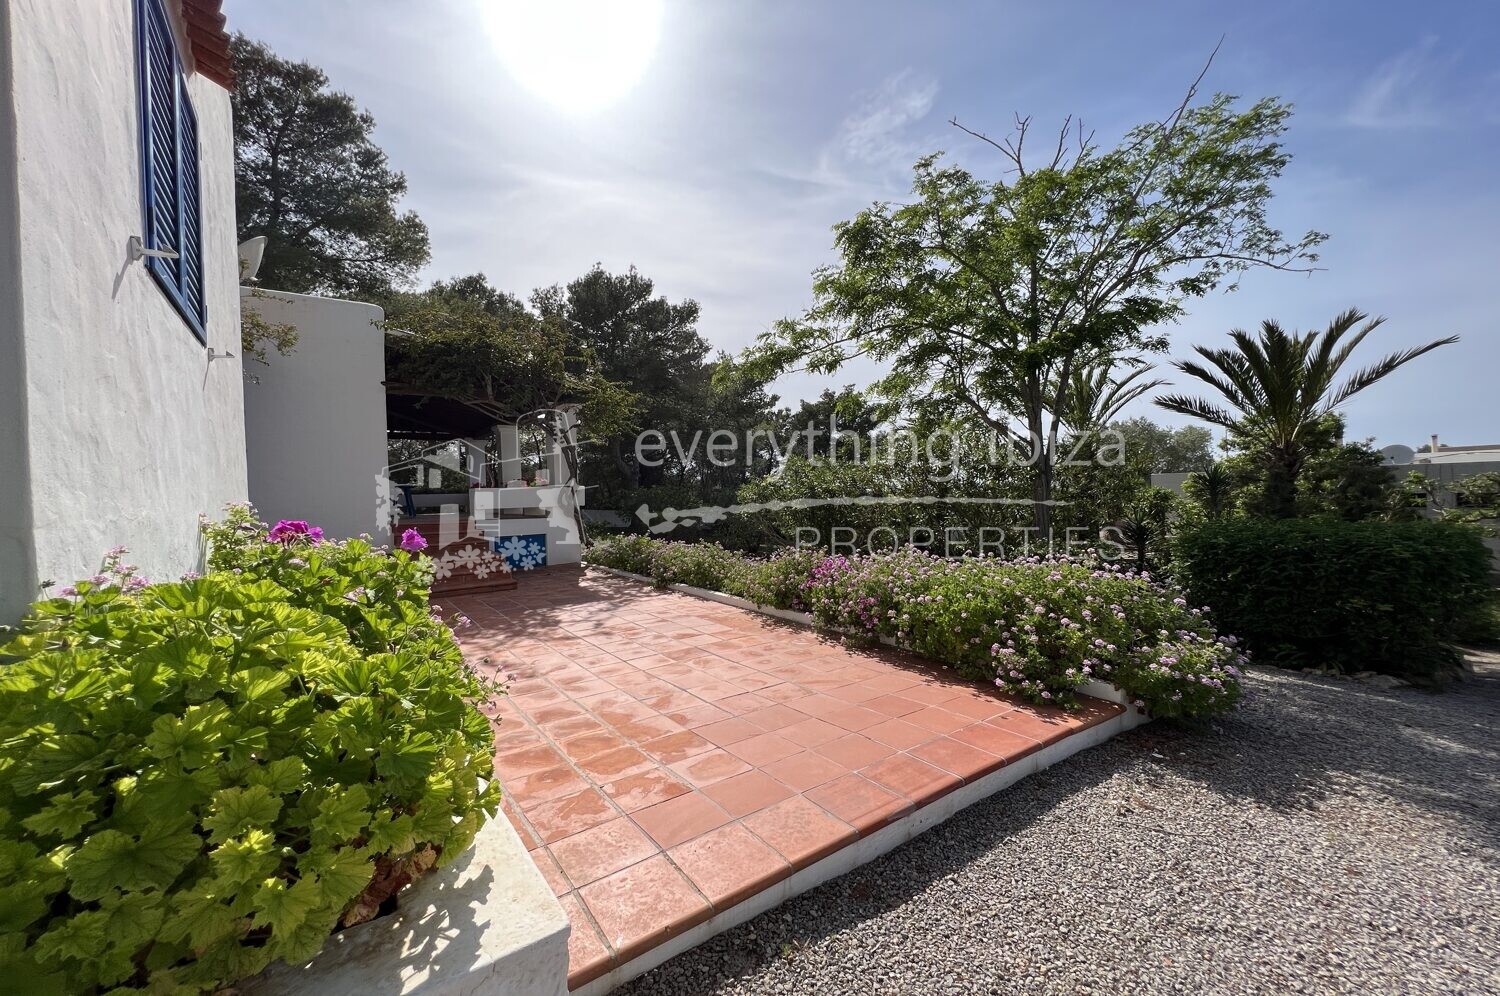 Peaceful & Private Detached Villa with Pool & Gardens, ref. 1454, for sale in Ibiza by everything ibiza Properties